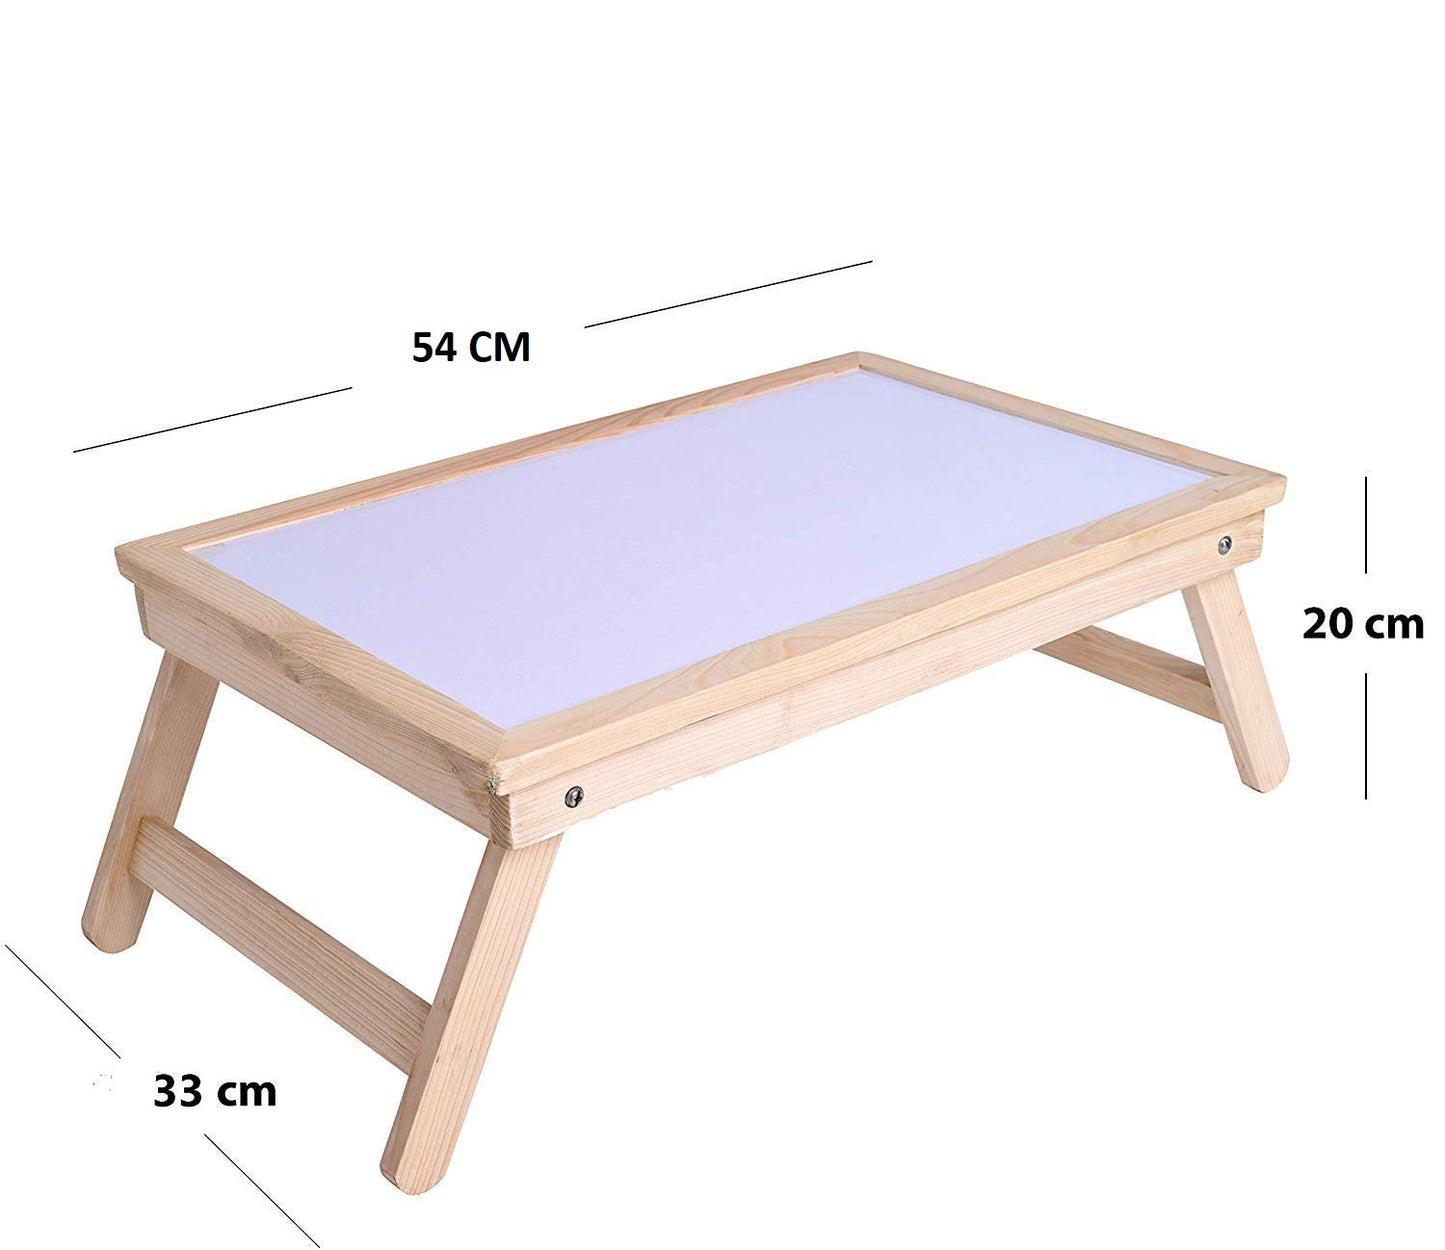 MM TOYS ProDesk Folding Wooden Writing White Board Study Table | Laptop Table | Work Table Large (21") - Versatile, Space-saving, Portable - Natural Wood